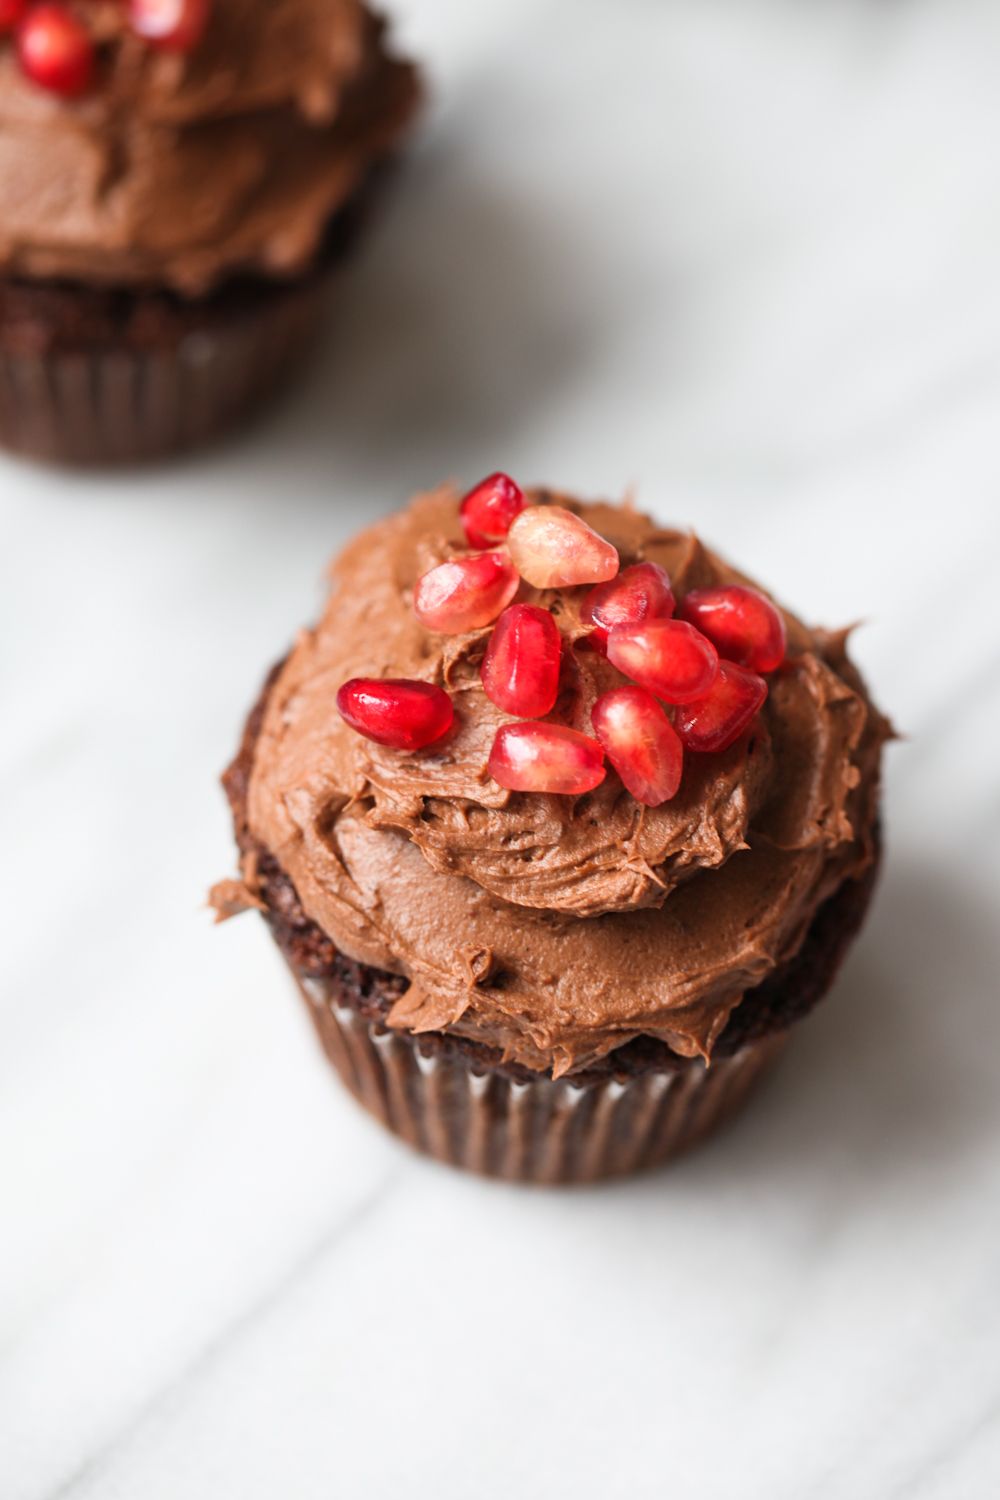 Whole foods gluten free cupcakes